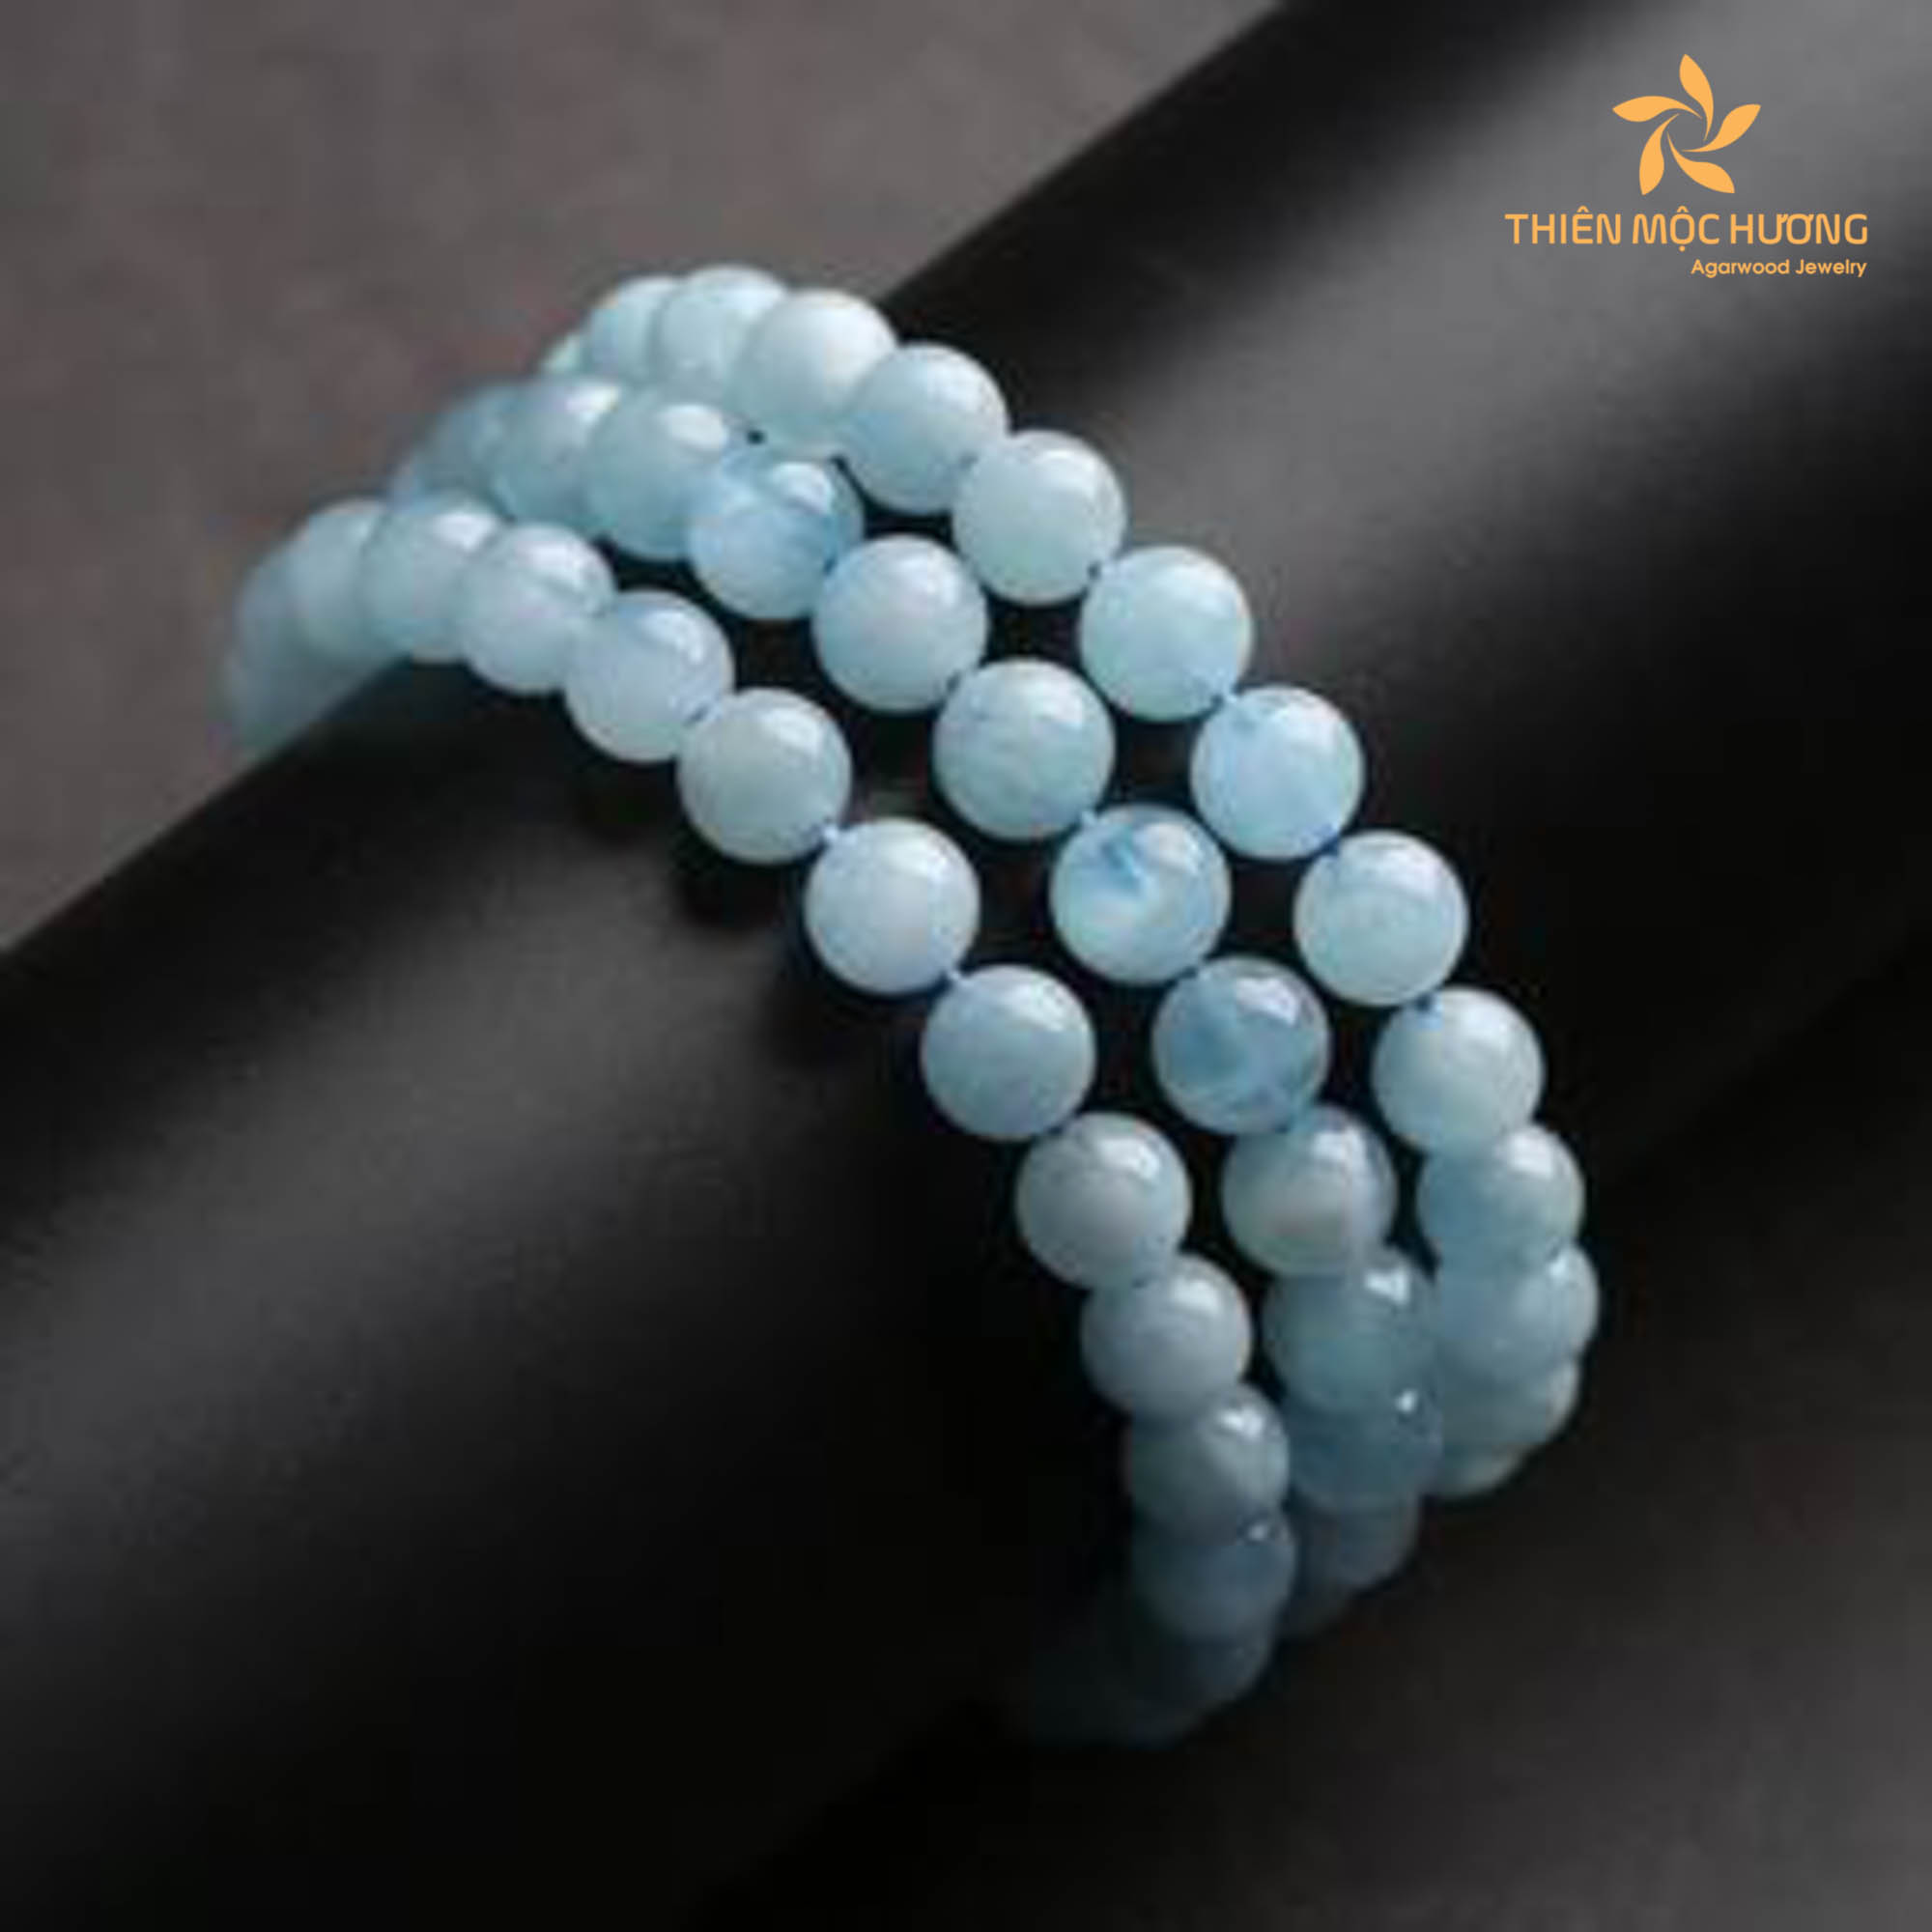 Aquamarine has adorned the crowns of royals and been revered by ancient cultures for its protective properties.